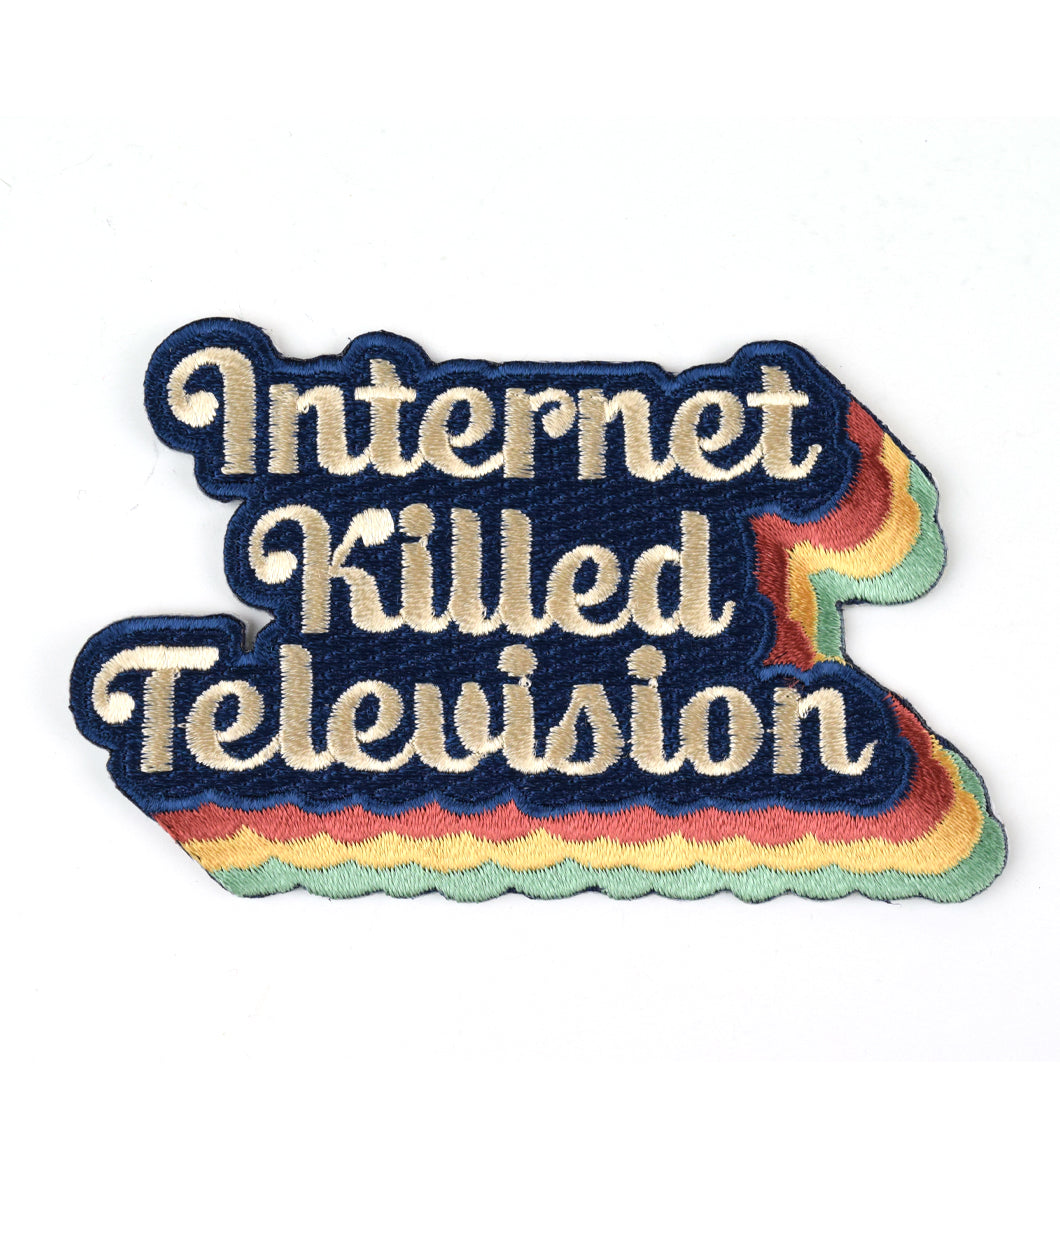 Iron-On Patch of the cursive phrase "Internet Killed Television" on a blue background with a multicolored outline on the bottom and right side - by Charles Trippy